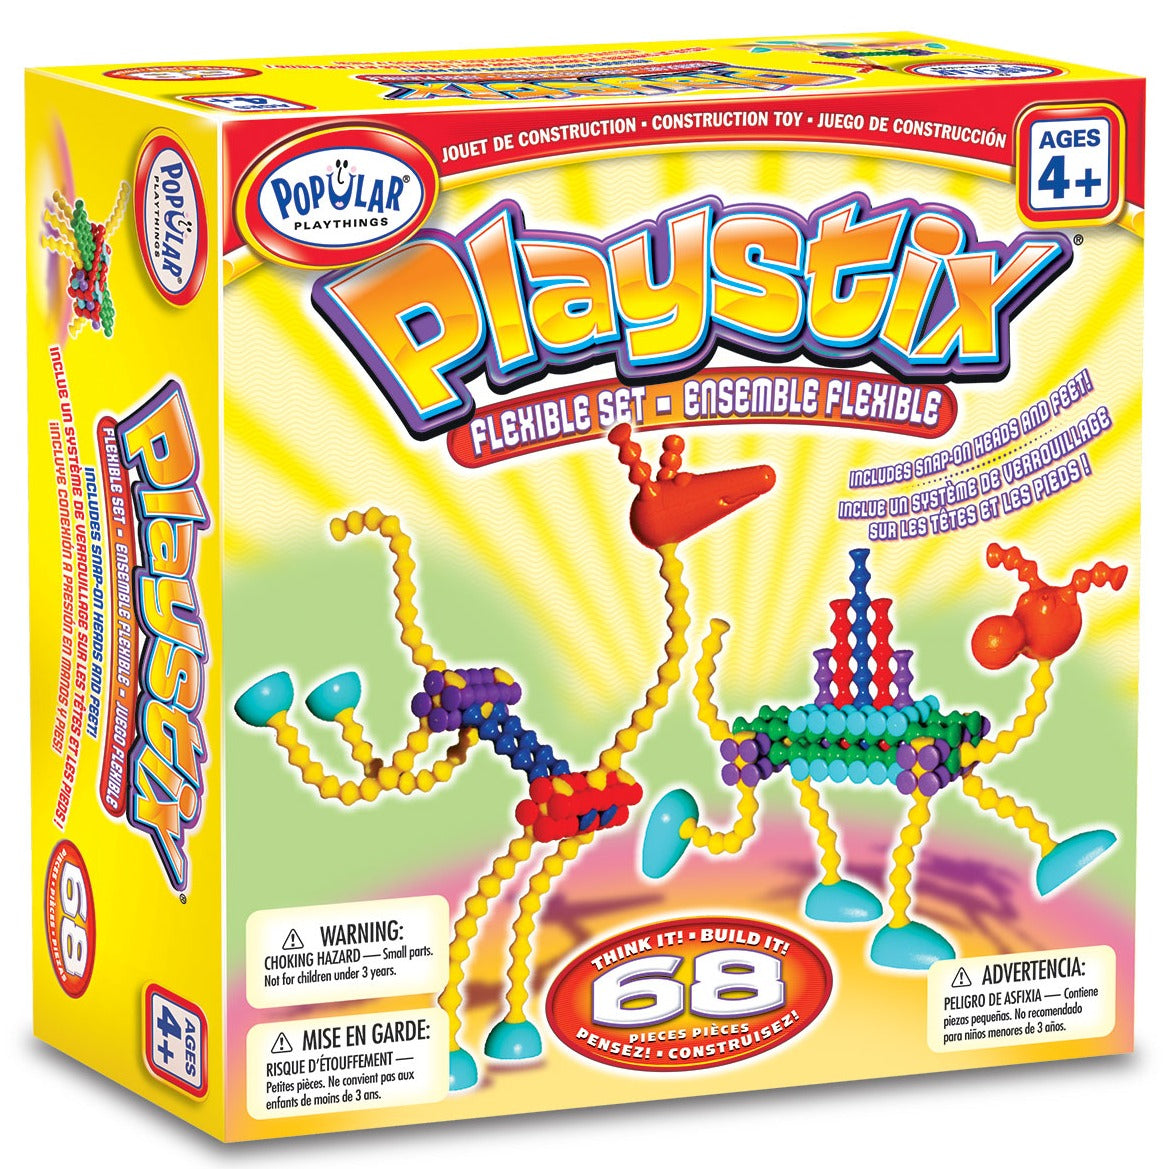 Flexible Playstix, Introducing Flexible Playstix, the innovative building toy that takes the classic Playstix experience to a whole new level! With these bendable and twistable building blocks, the creative possibilities are endless. This set includes 46 Rigid Playstix pieces in a variety of vibrant colors, including 14 light blue, 16 purple, 6 red, 6 dark blue, and 4 green pieces. In addition, there are 12 Flexible Playstix pieces in yellow, both short and long. The combination of rigid and flexible pieces